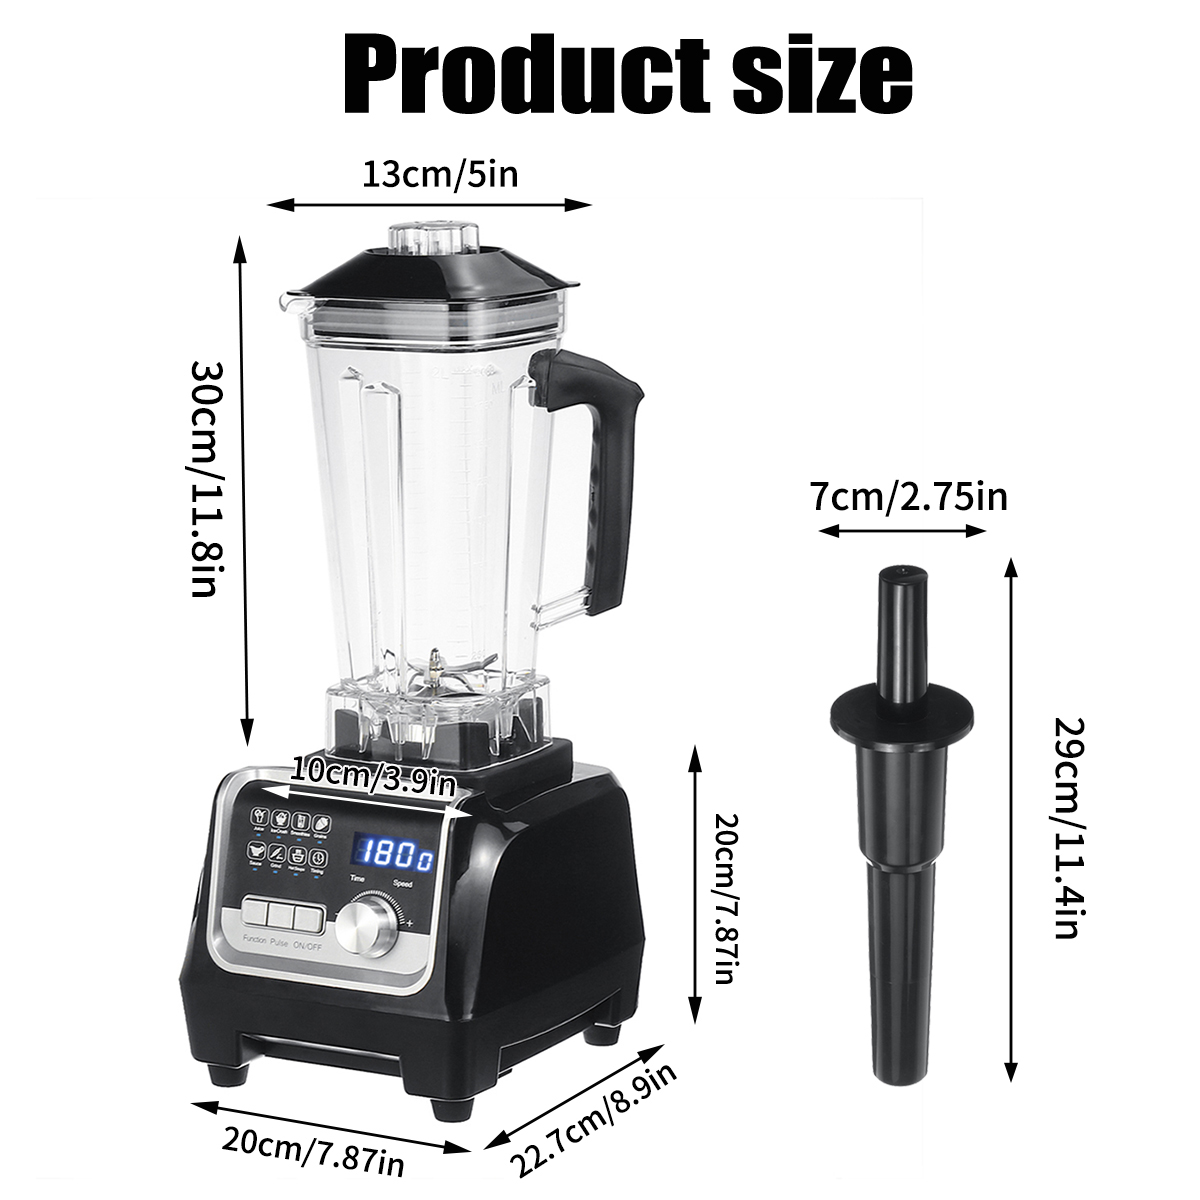 Digital-3HP-BPA-FREE-2L-Automatic-Touchpad-Professional-Blender-Mixer-Juicer-1848947-12